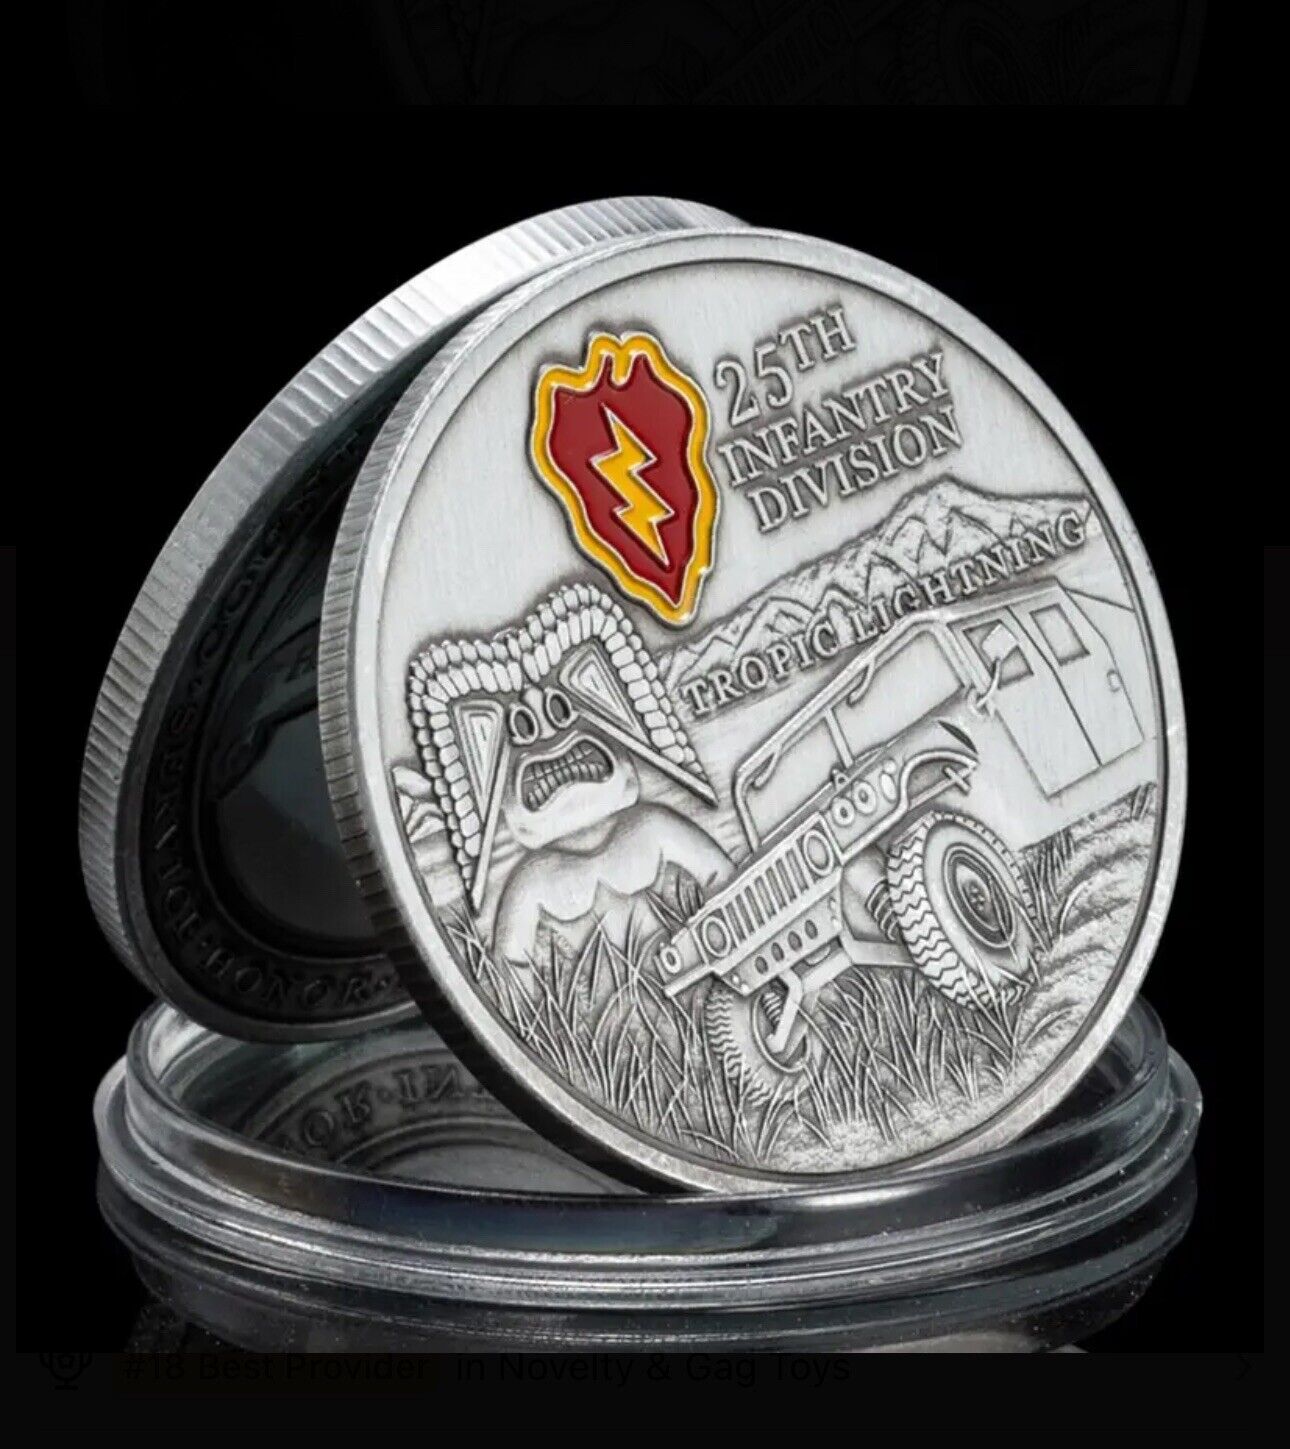 25th Light Infantry Division Of The U.S. Army Tropic Lightning Challenge Coin